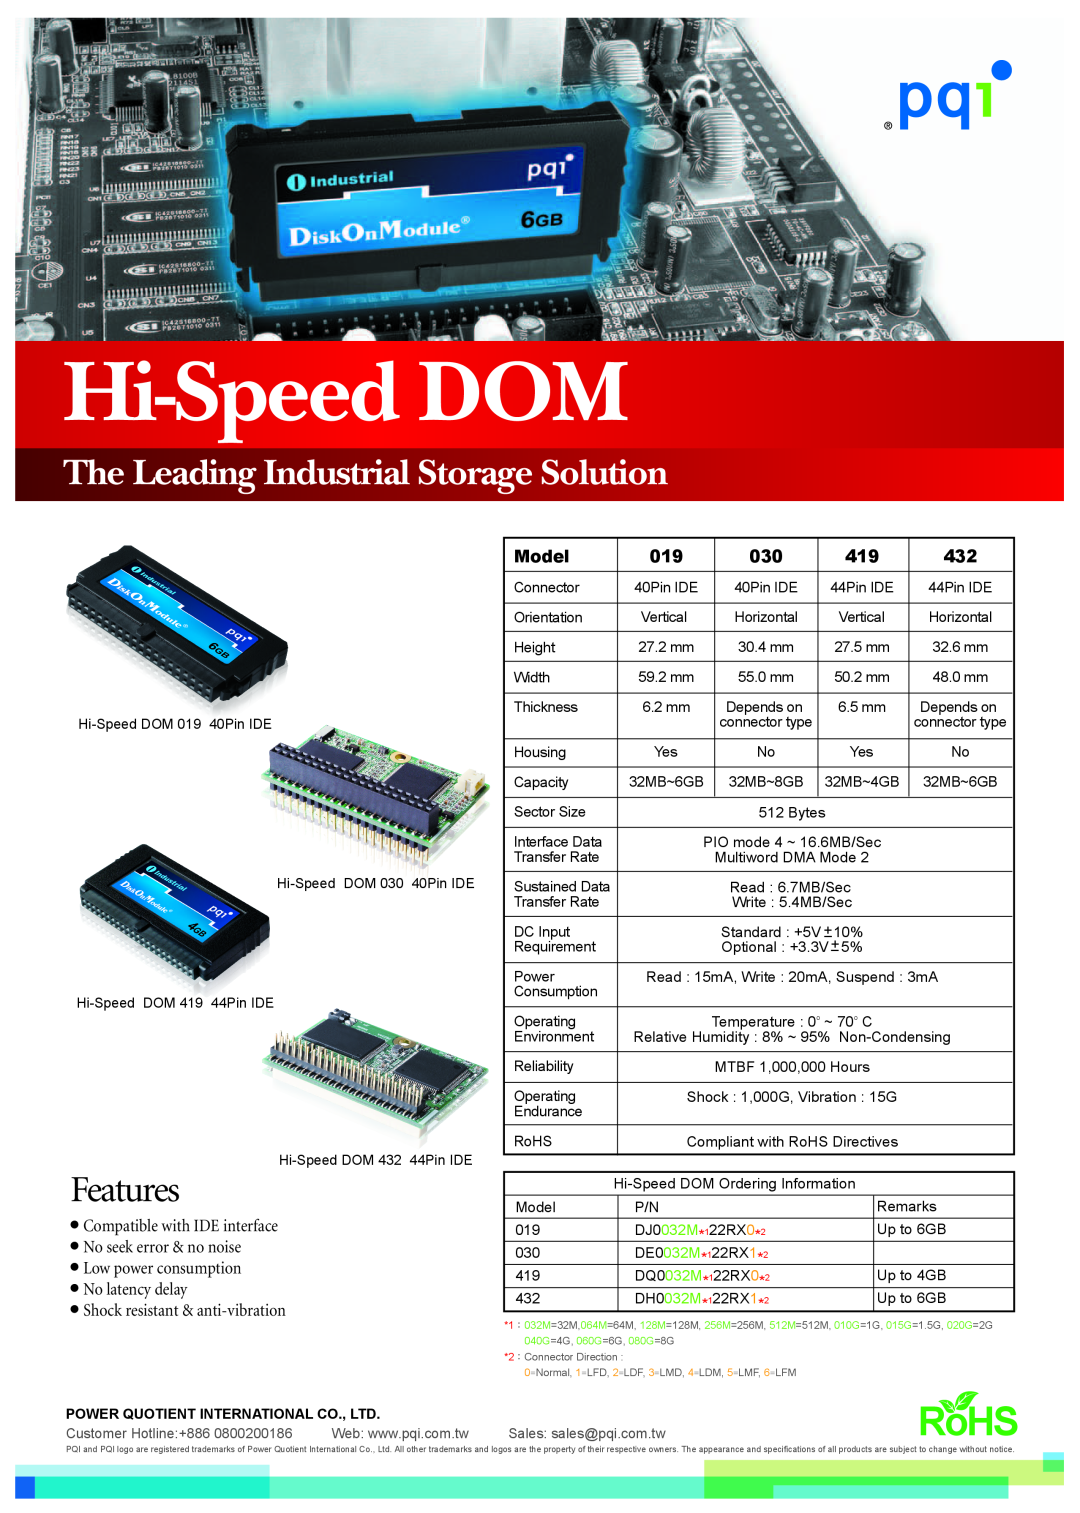 PQI 030 specifications Hi-Speed DOM, RoHS, The Leading Industrial Storage Solution, Features, Model, Customer Hotline+886 